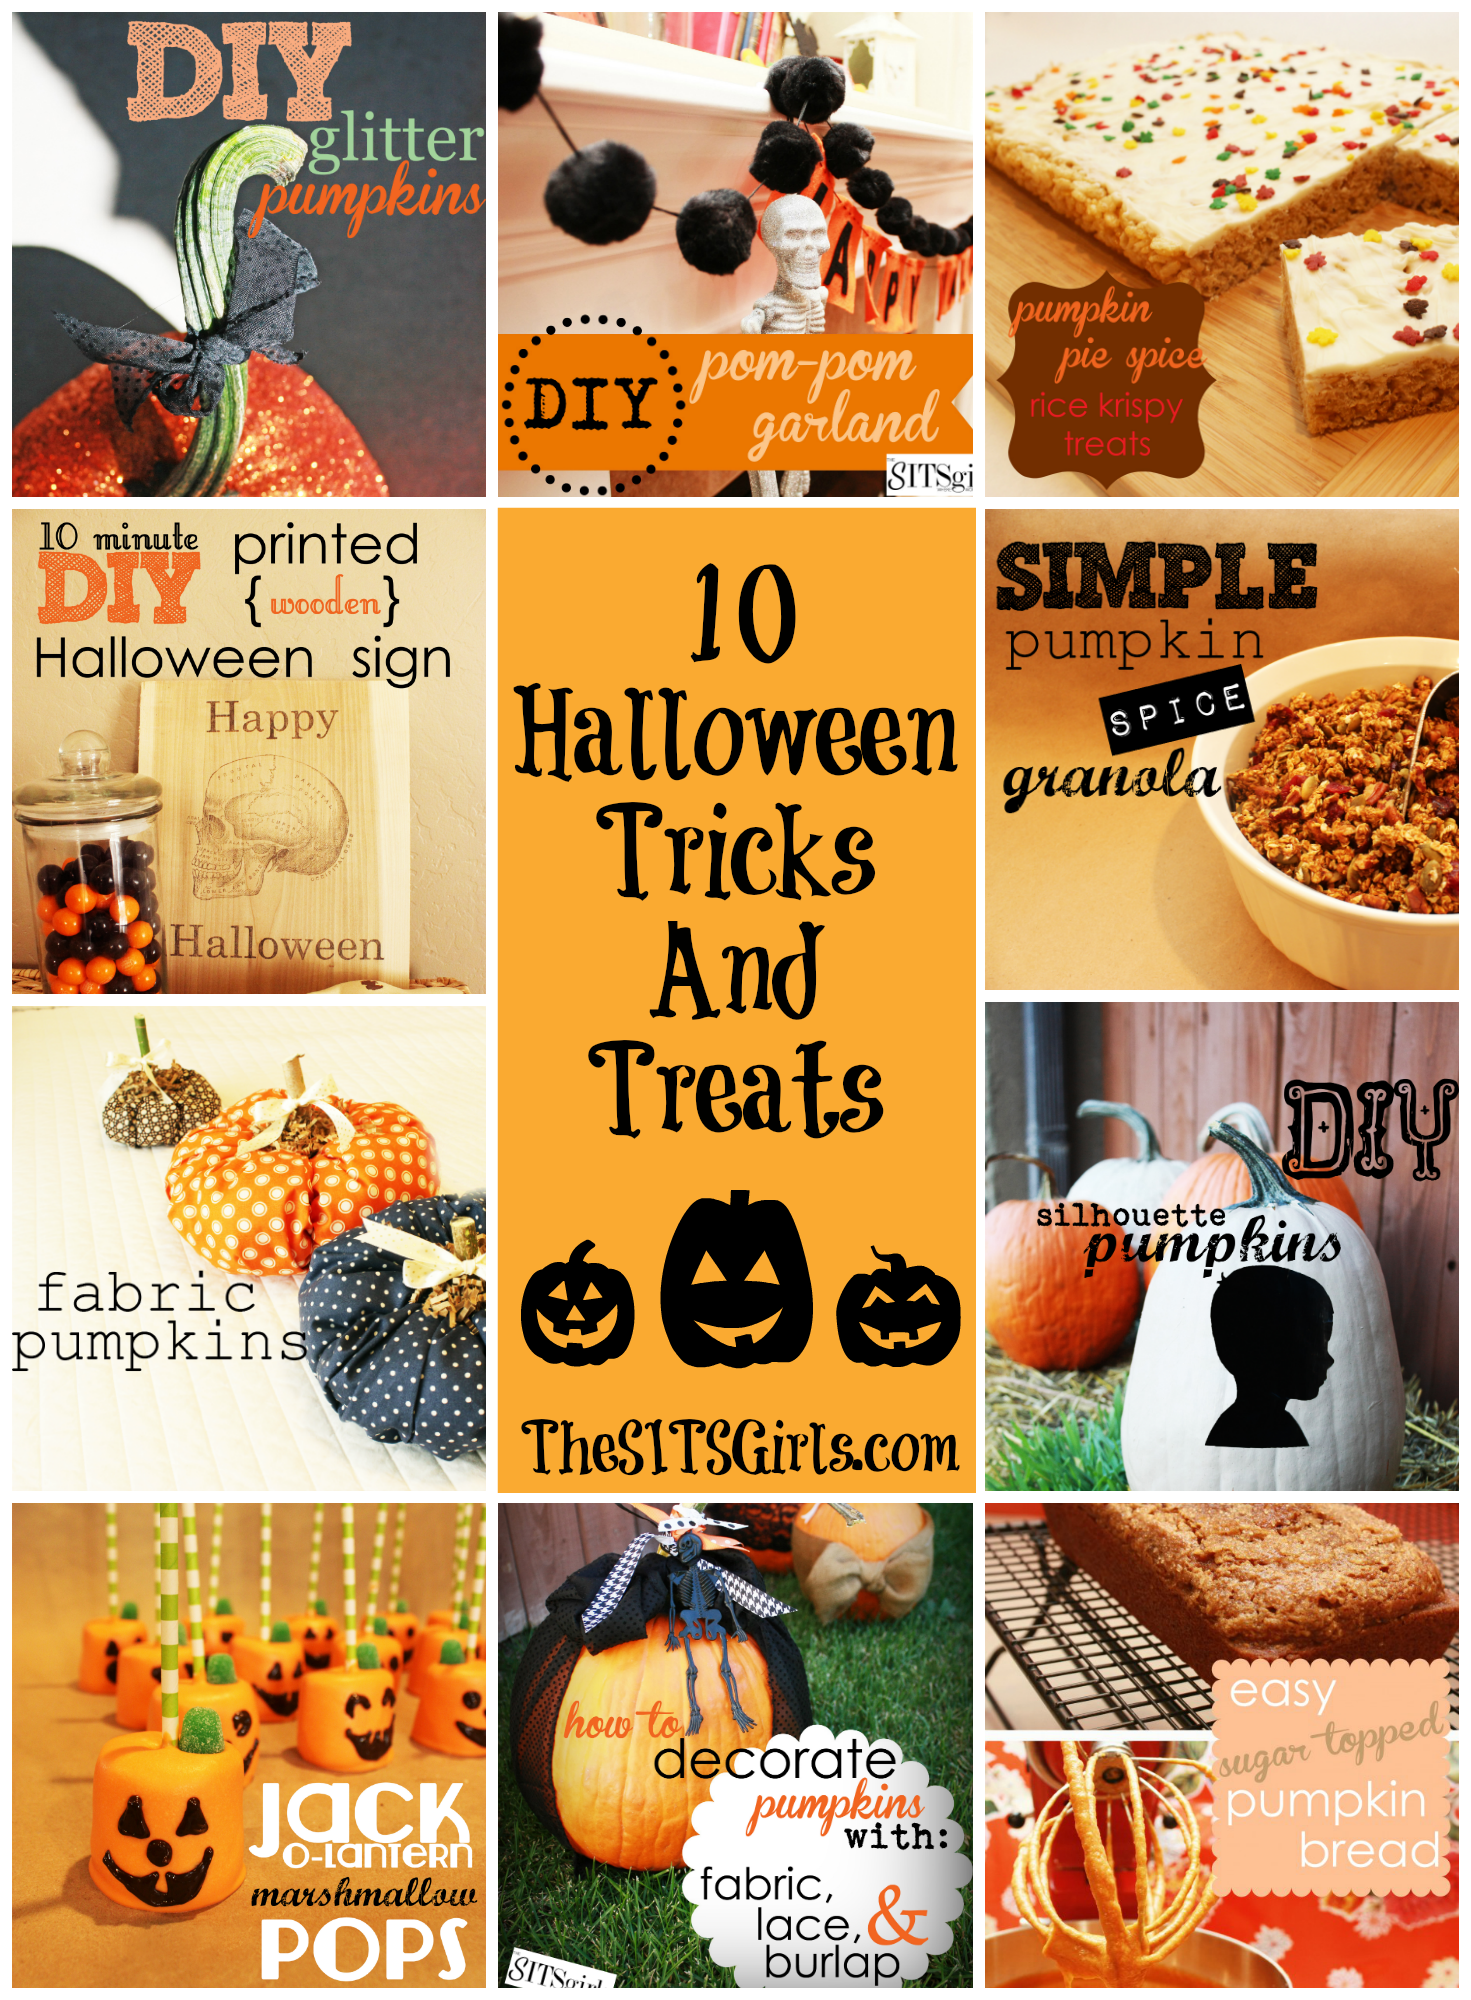 10 Halloween ideas with craft and recipe tutorials - from pumpkin spice granola to decorating pumpkins with lace and burlap - that are sure to make your holiday a little more easy and fun.